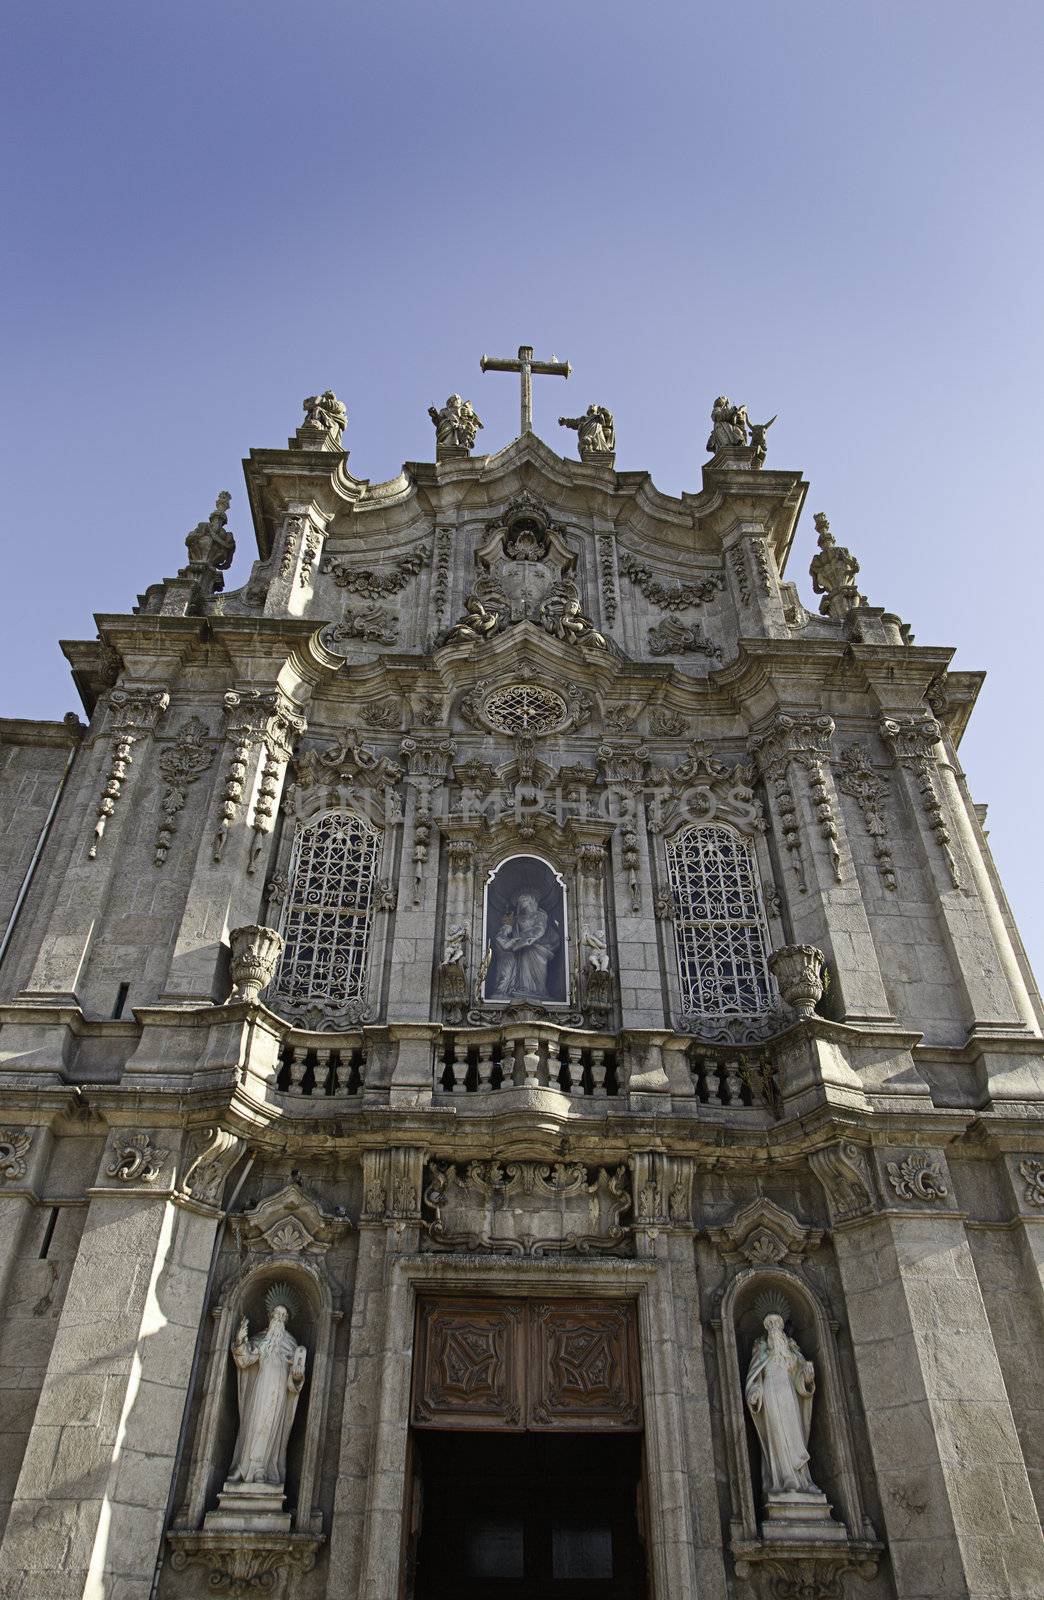 Christian Church in Lisbon, detail of the front facade, historic building